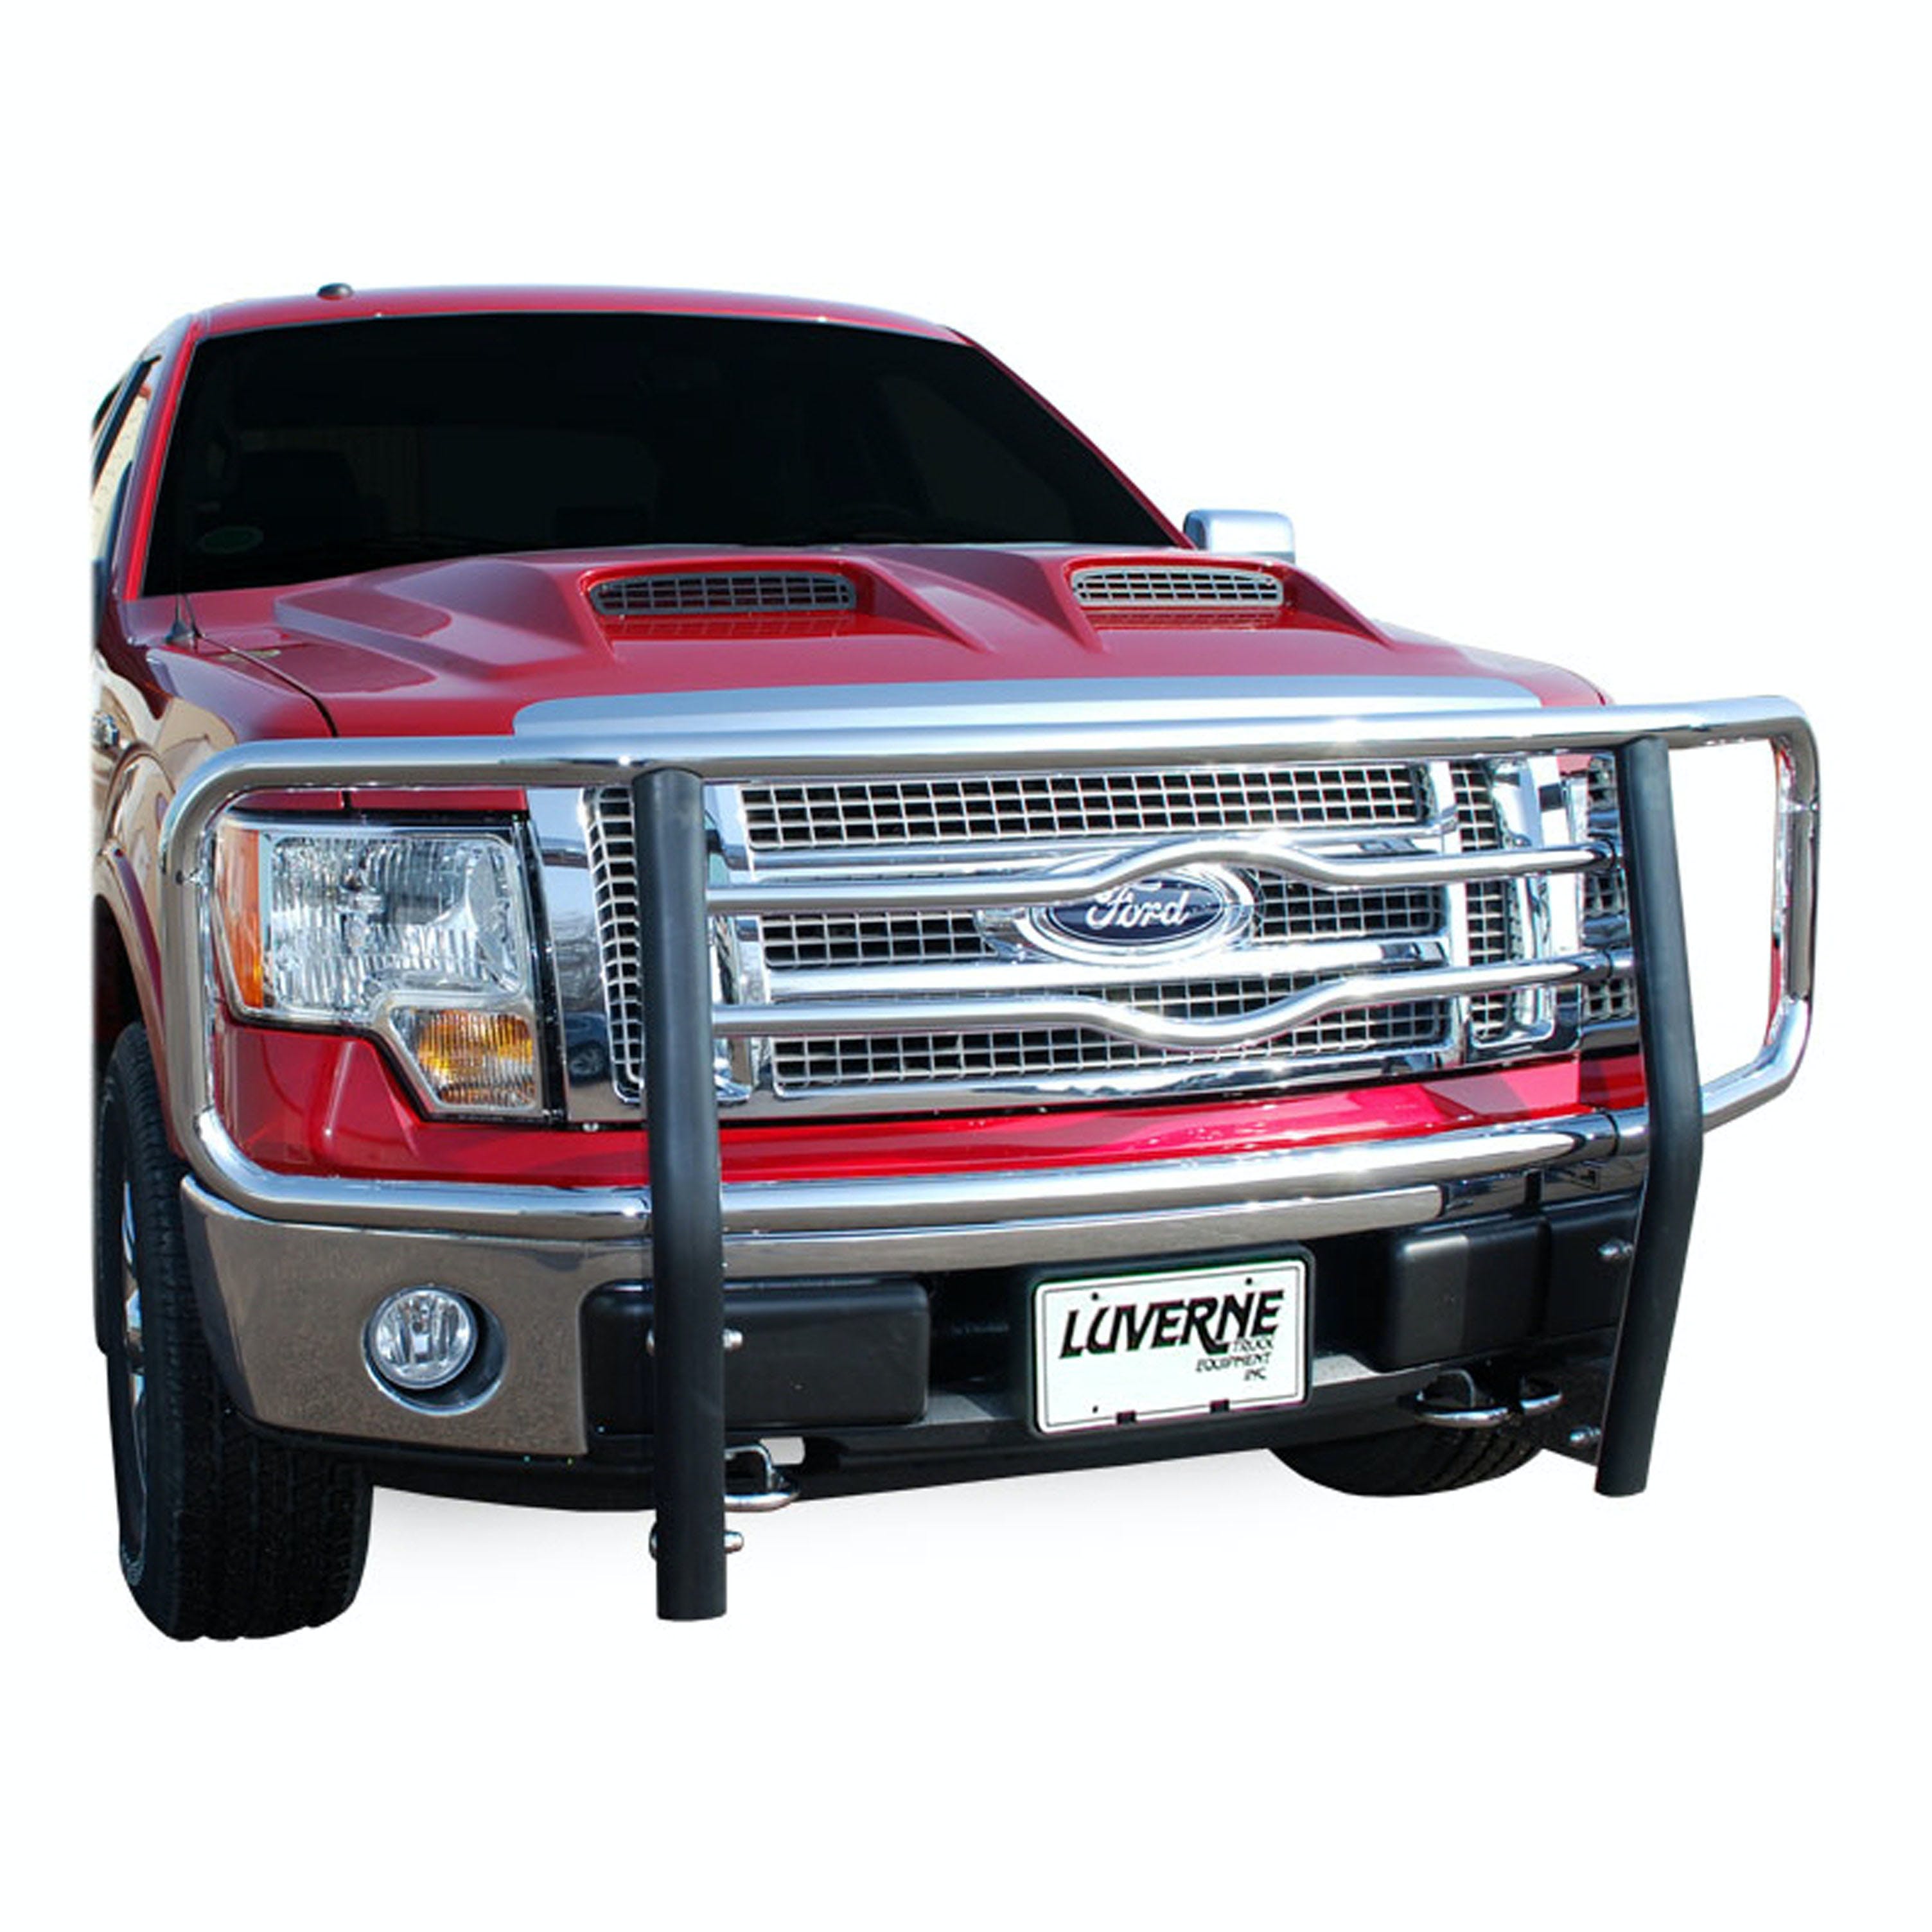 LUVERNE 330920 2 inch Tubular Grille Guard Upright Package